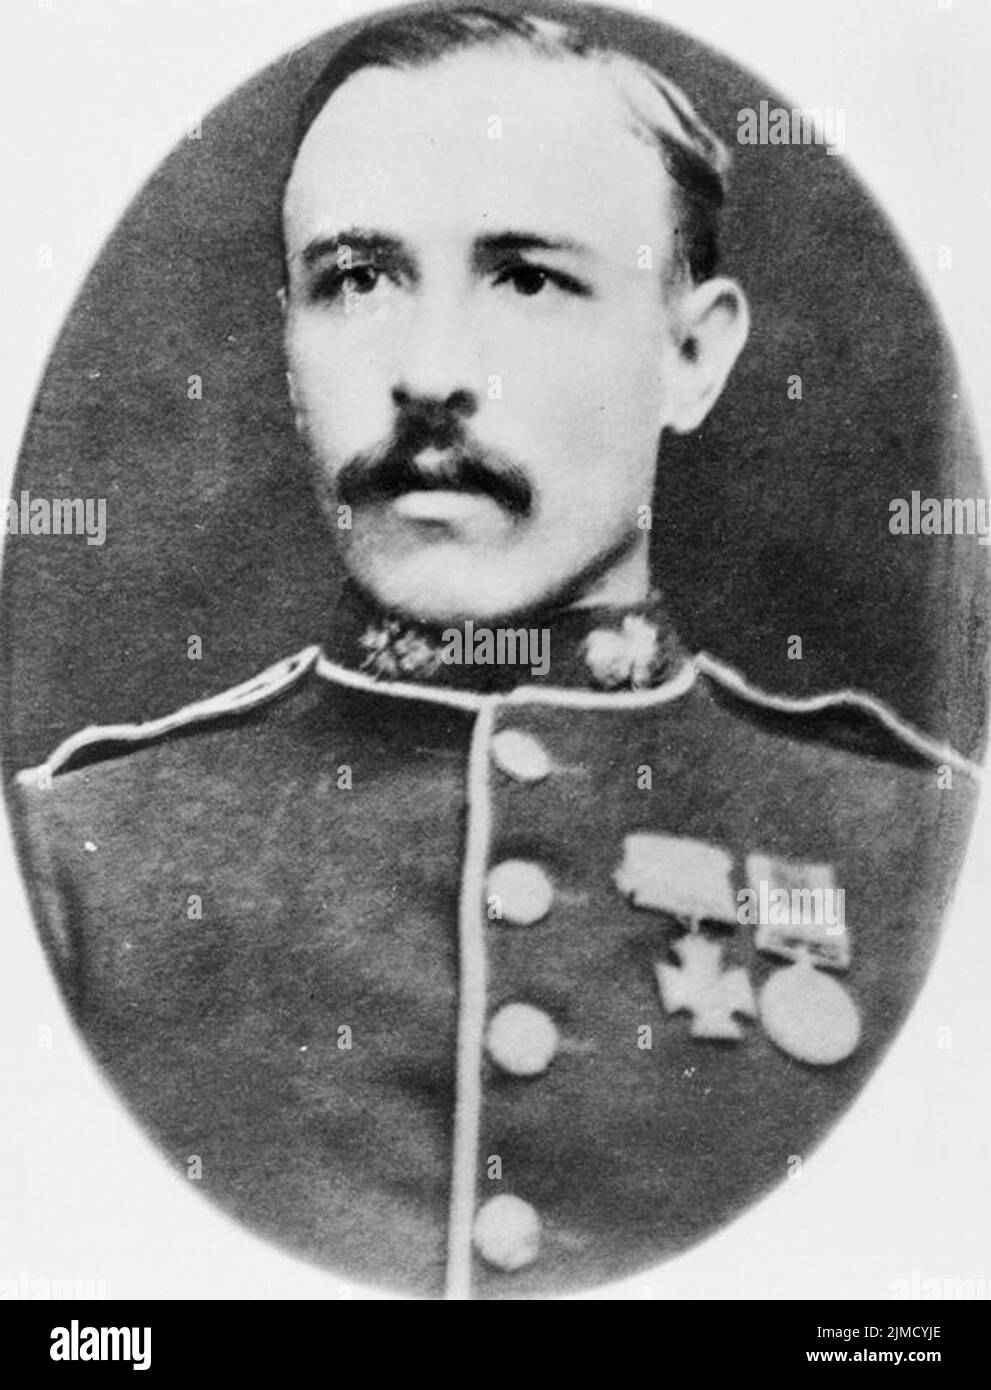 Thomas Elsdon Ashford was a private in The Royal Fusiliers,British Army during the Second Anglo-Afghan War. He was awarded the Victoria Cross for assisting Lieutenant William St. Lucien Chase in rescuing and carrying for a distance of over 200 yards under the fire of the enemy, a wounded soldier who Stock Photo